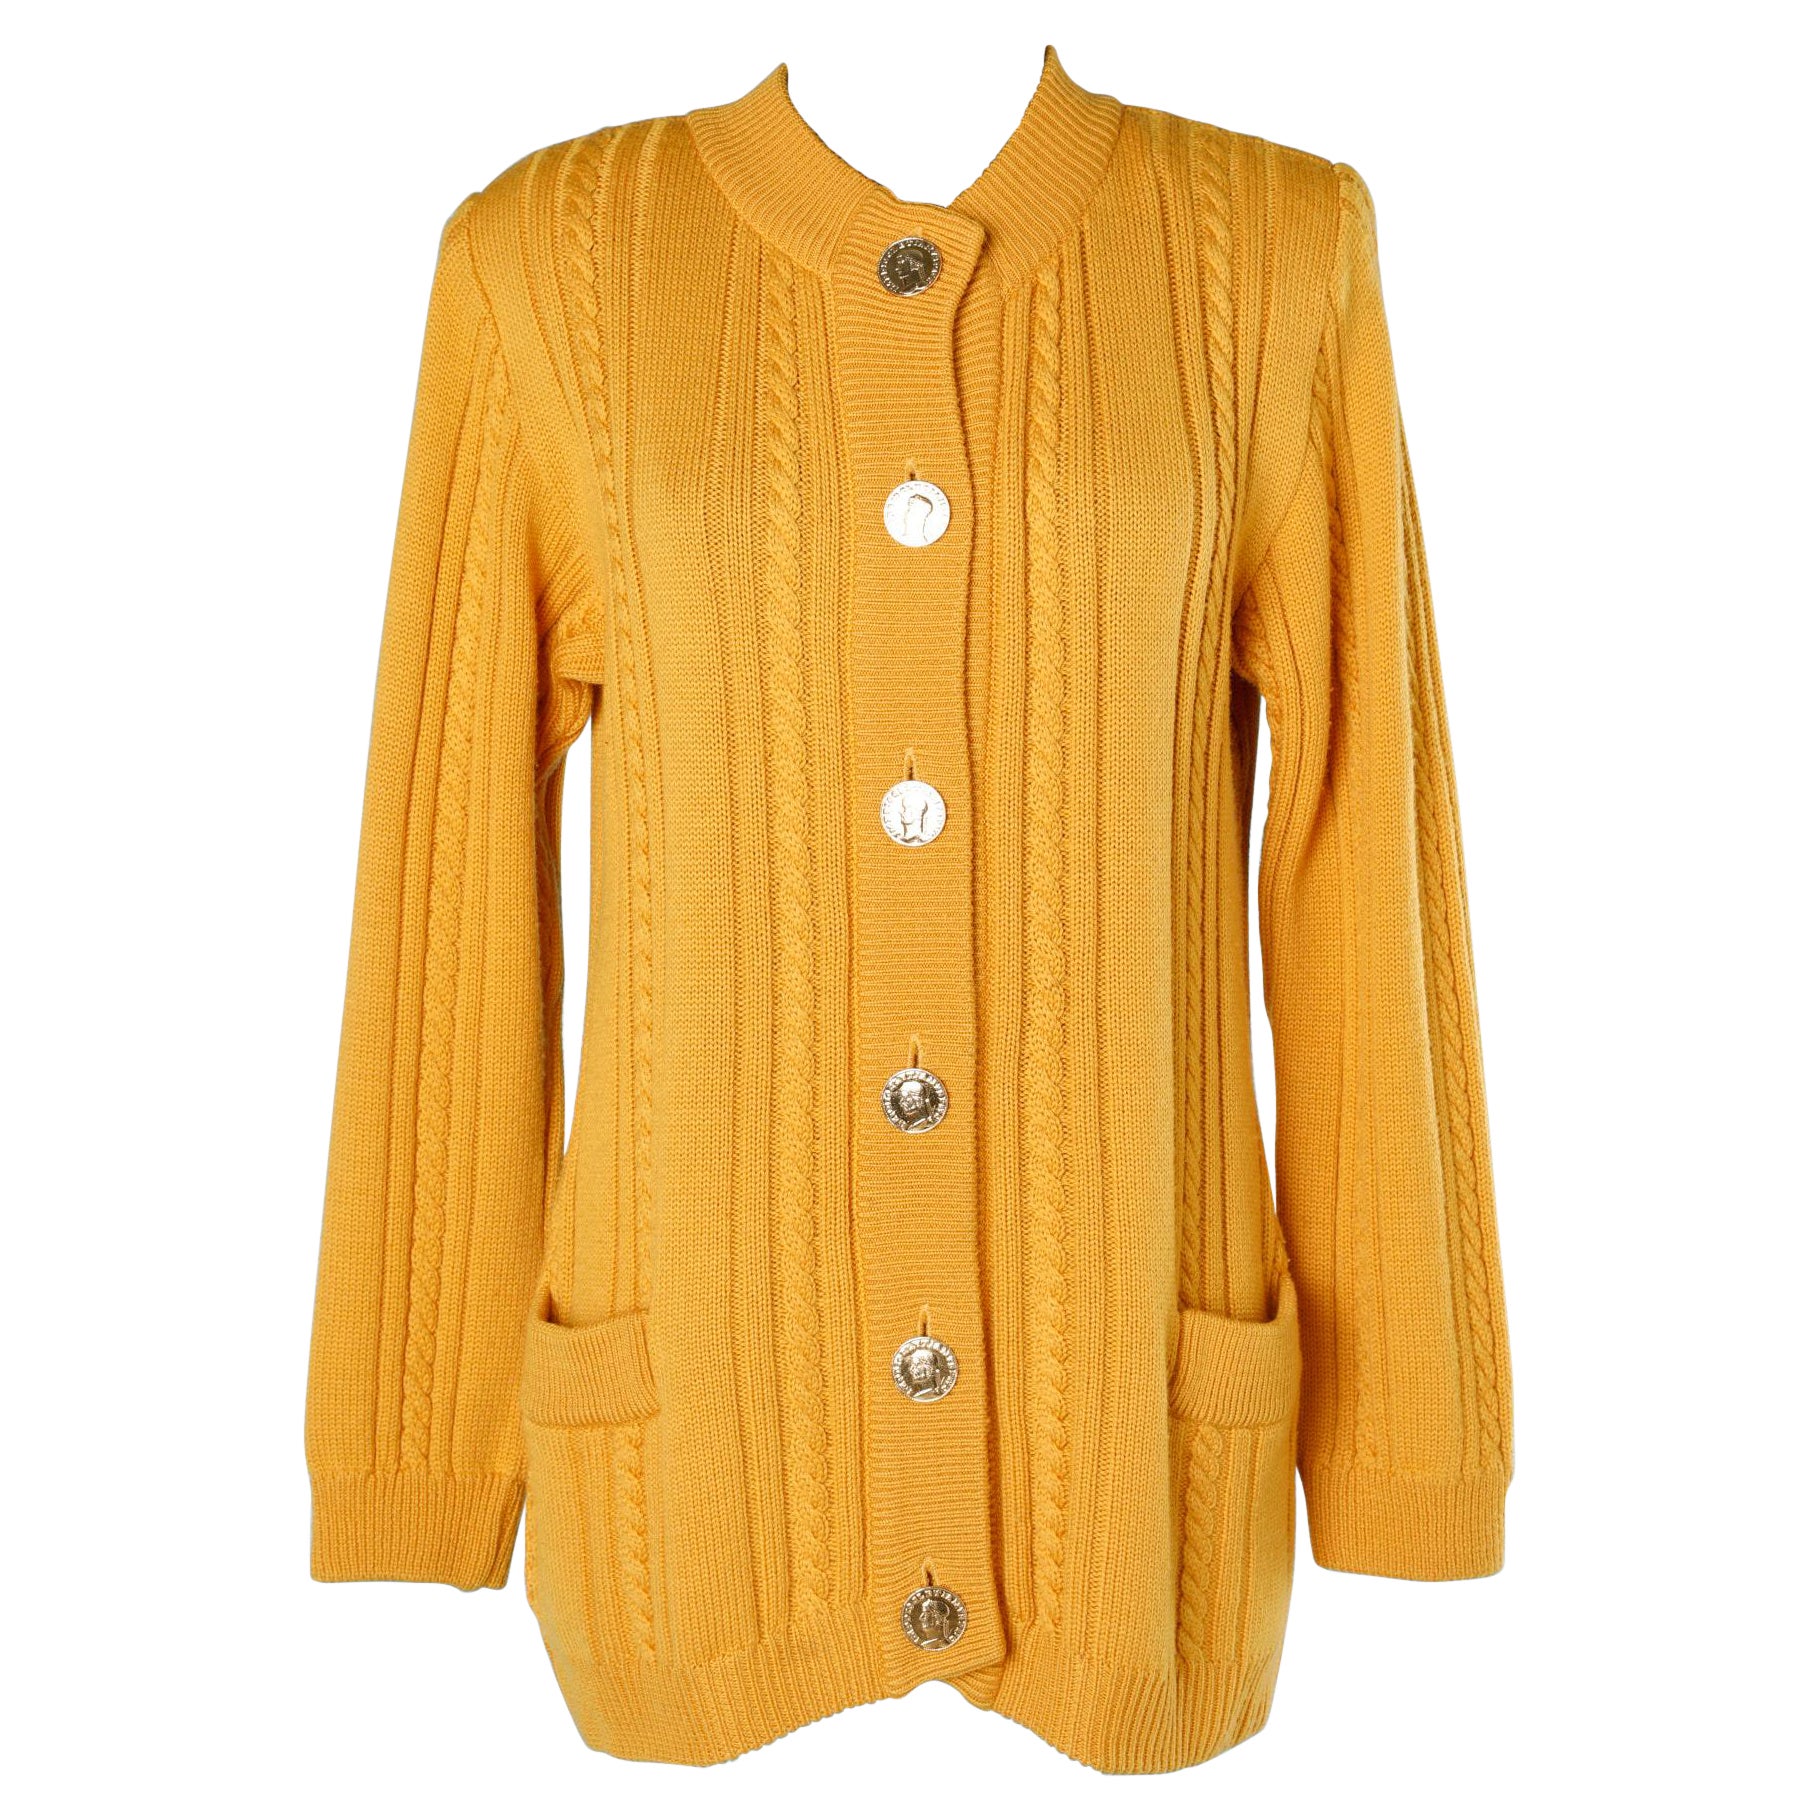 Mustard knit cardigan with gold metal buttons Yves Saint Laurent Rive Gauche 